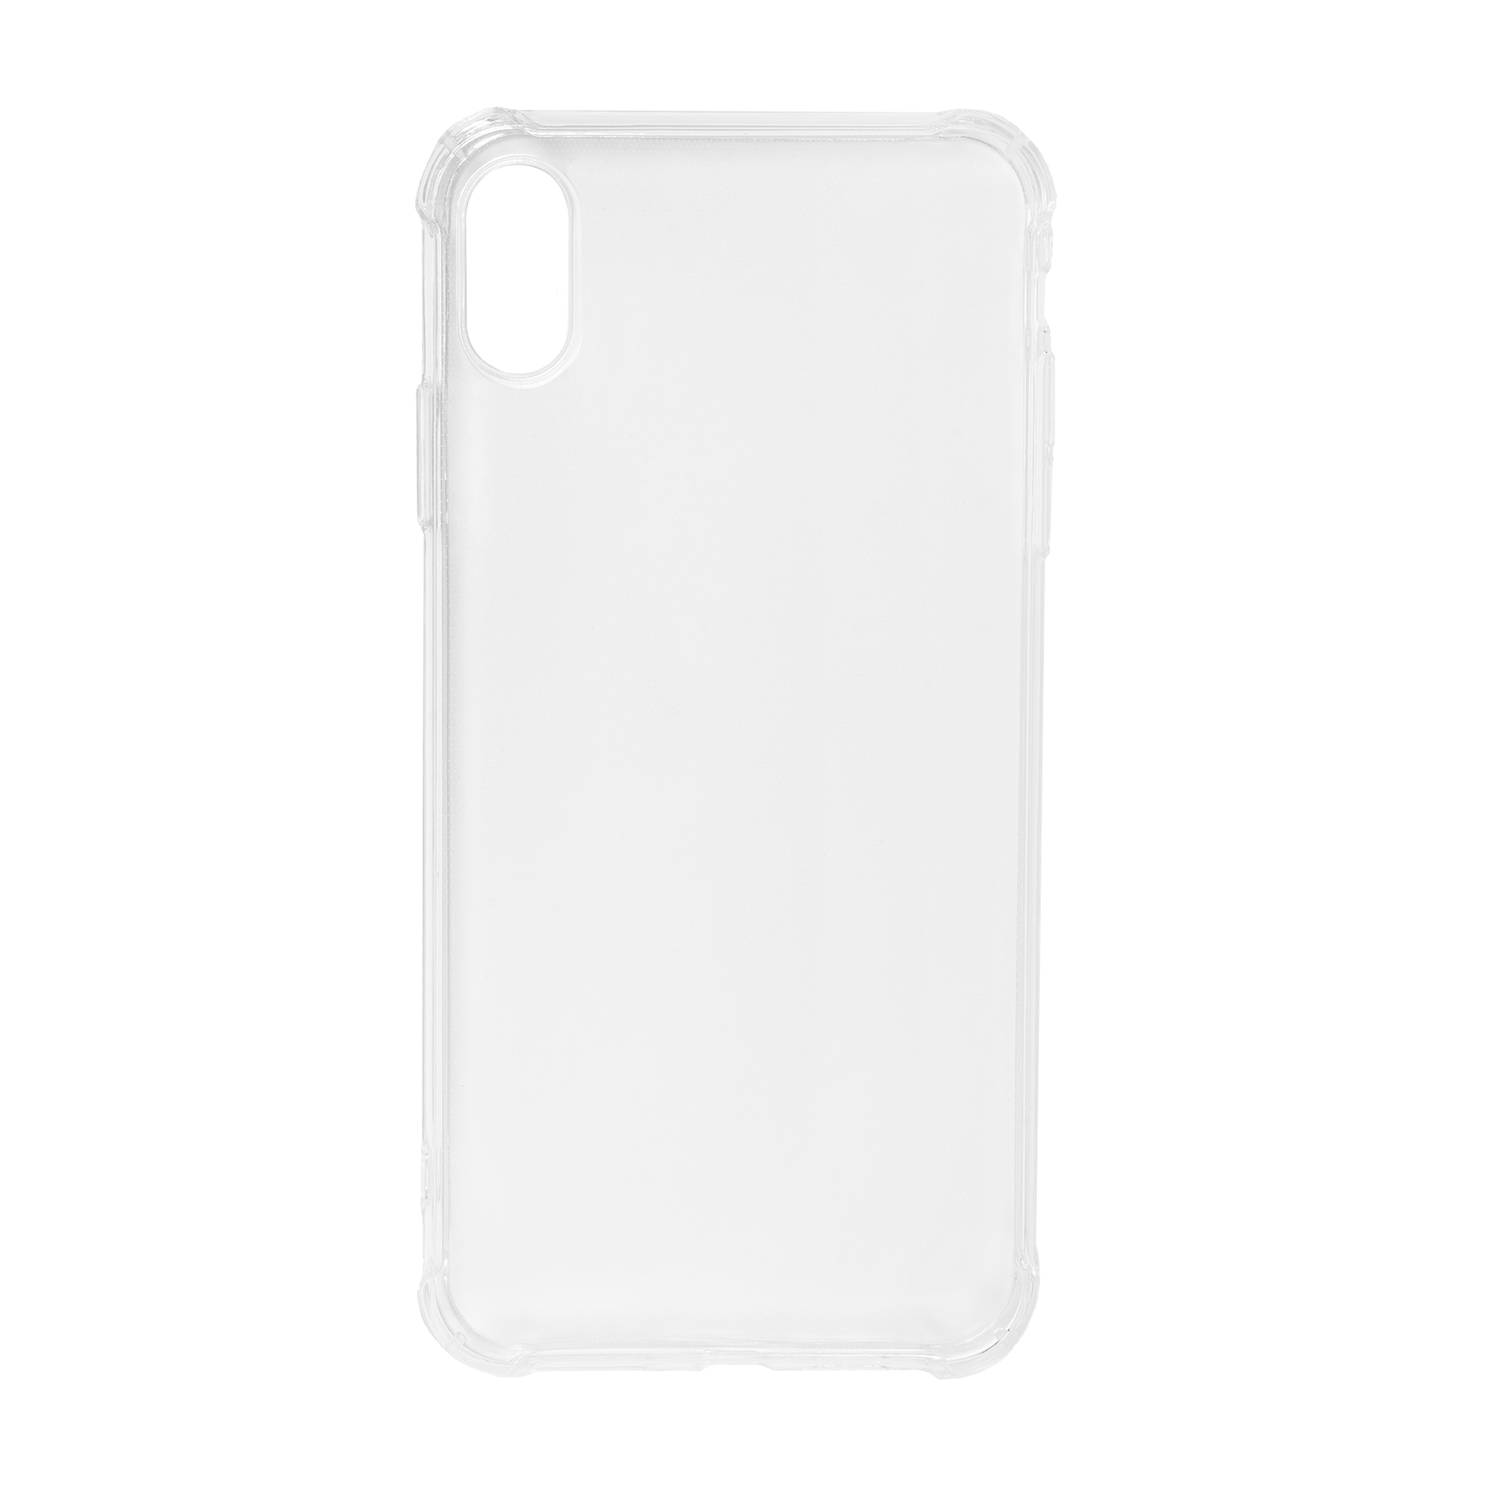 BMAX TPU soft case hoesje voor iPhone X/XS - Clear/Transparant